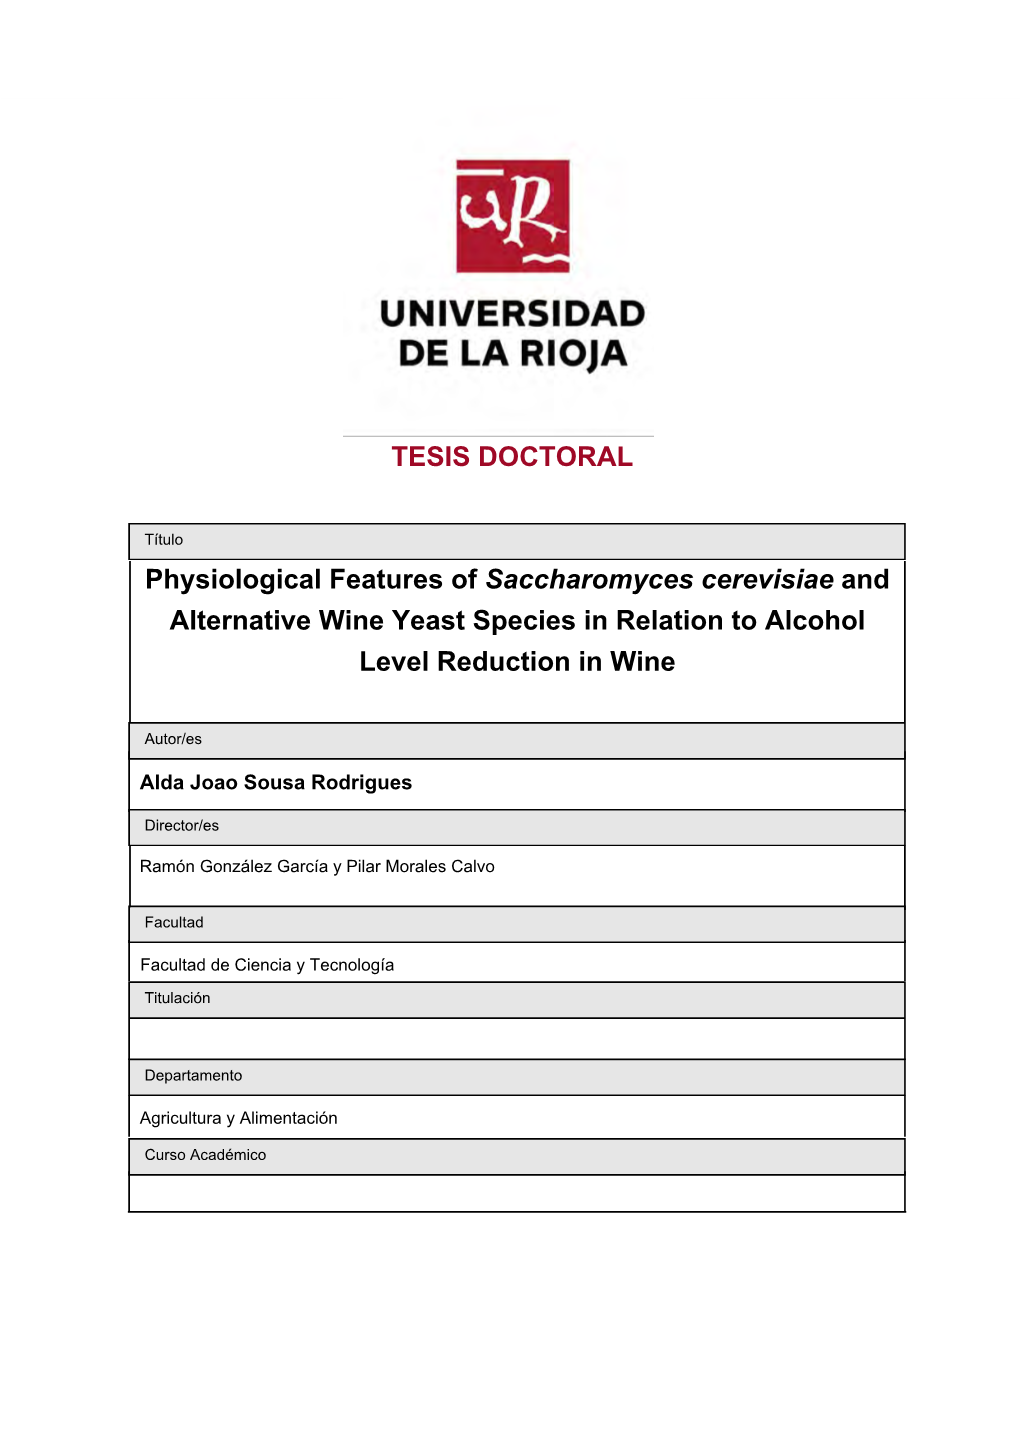 Physiological Features of Saccharomyces Cerevisiae and Alternative Wine Yeast Species in Relation to Alcohol Level Reduction in Wine